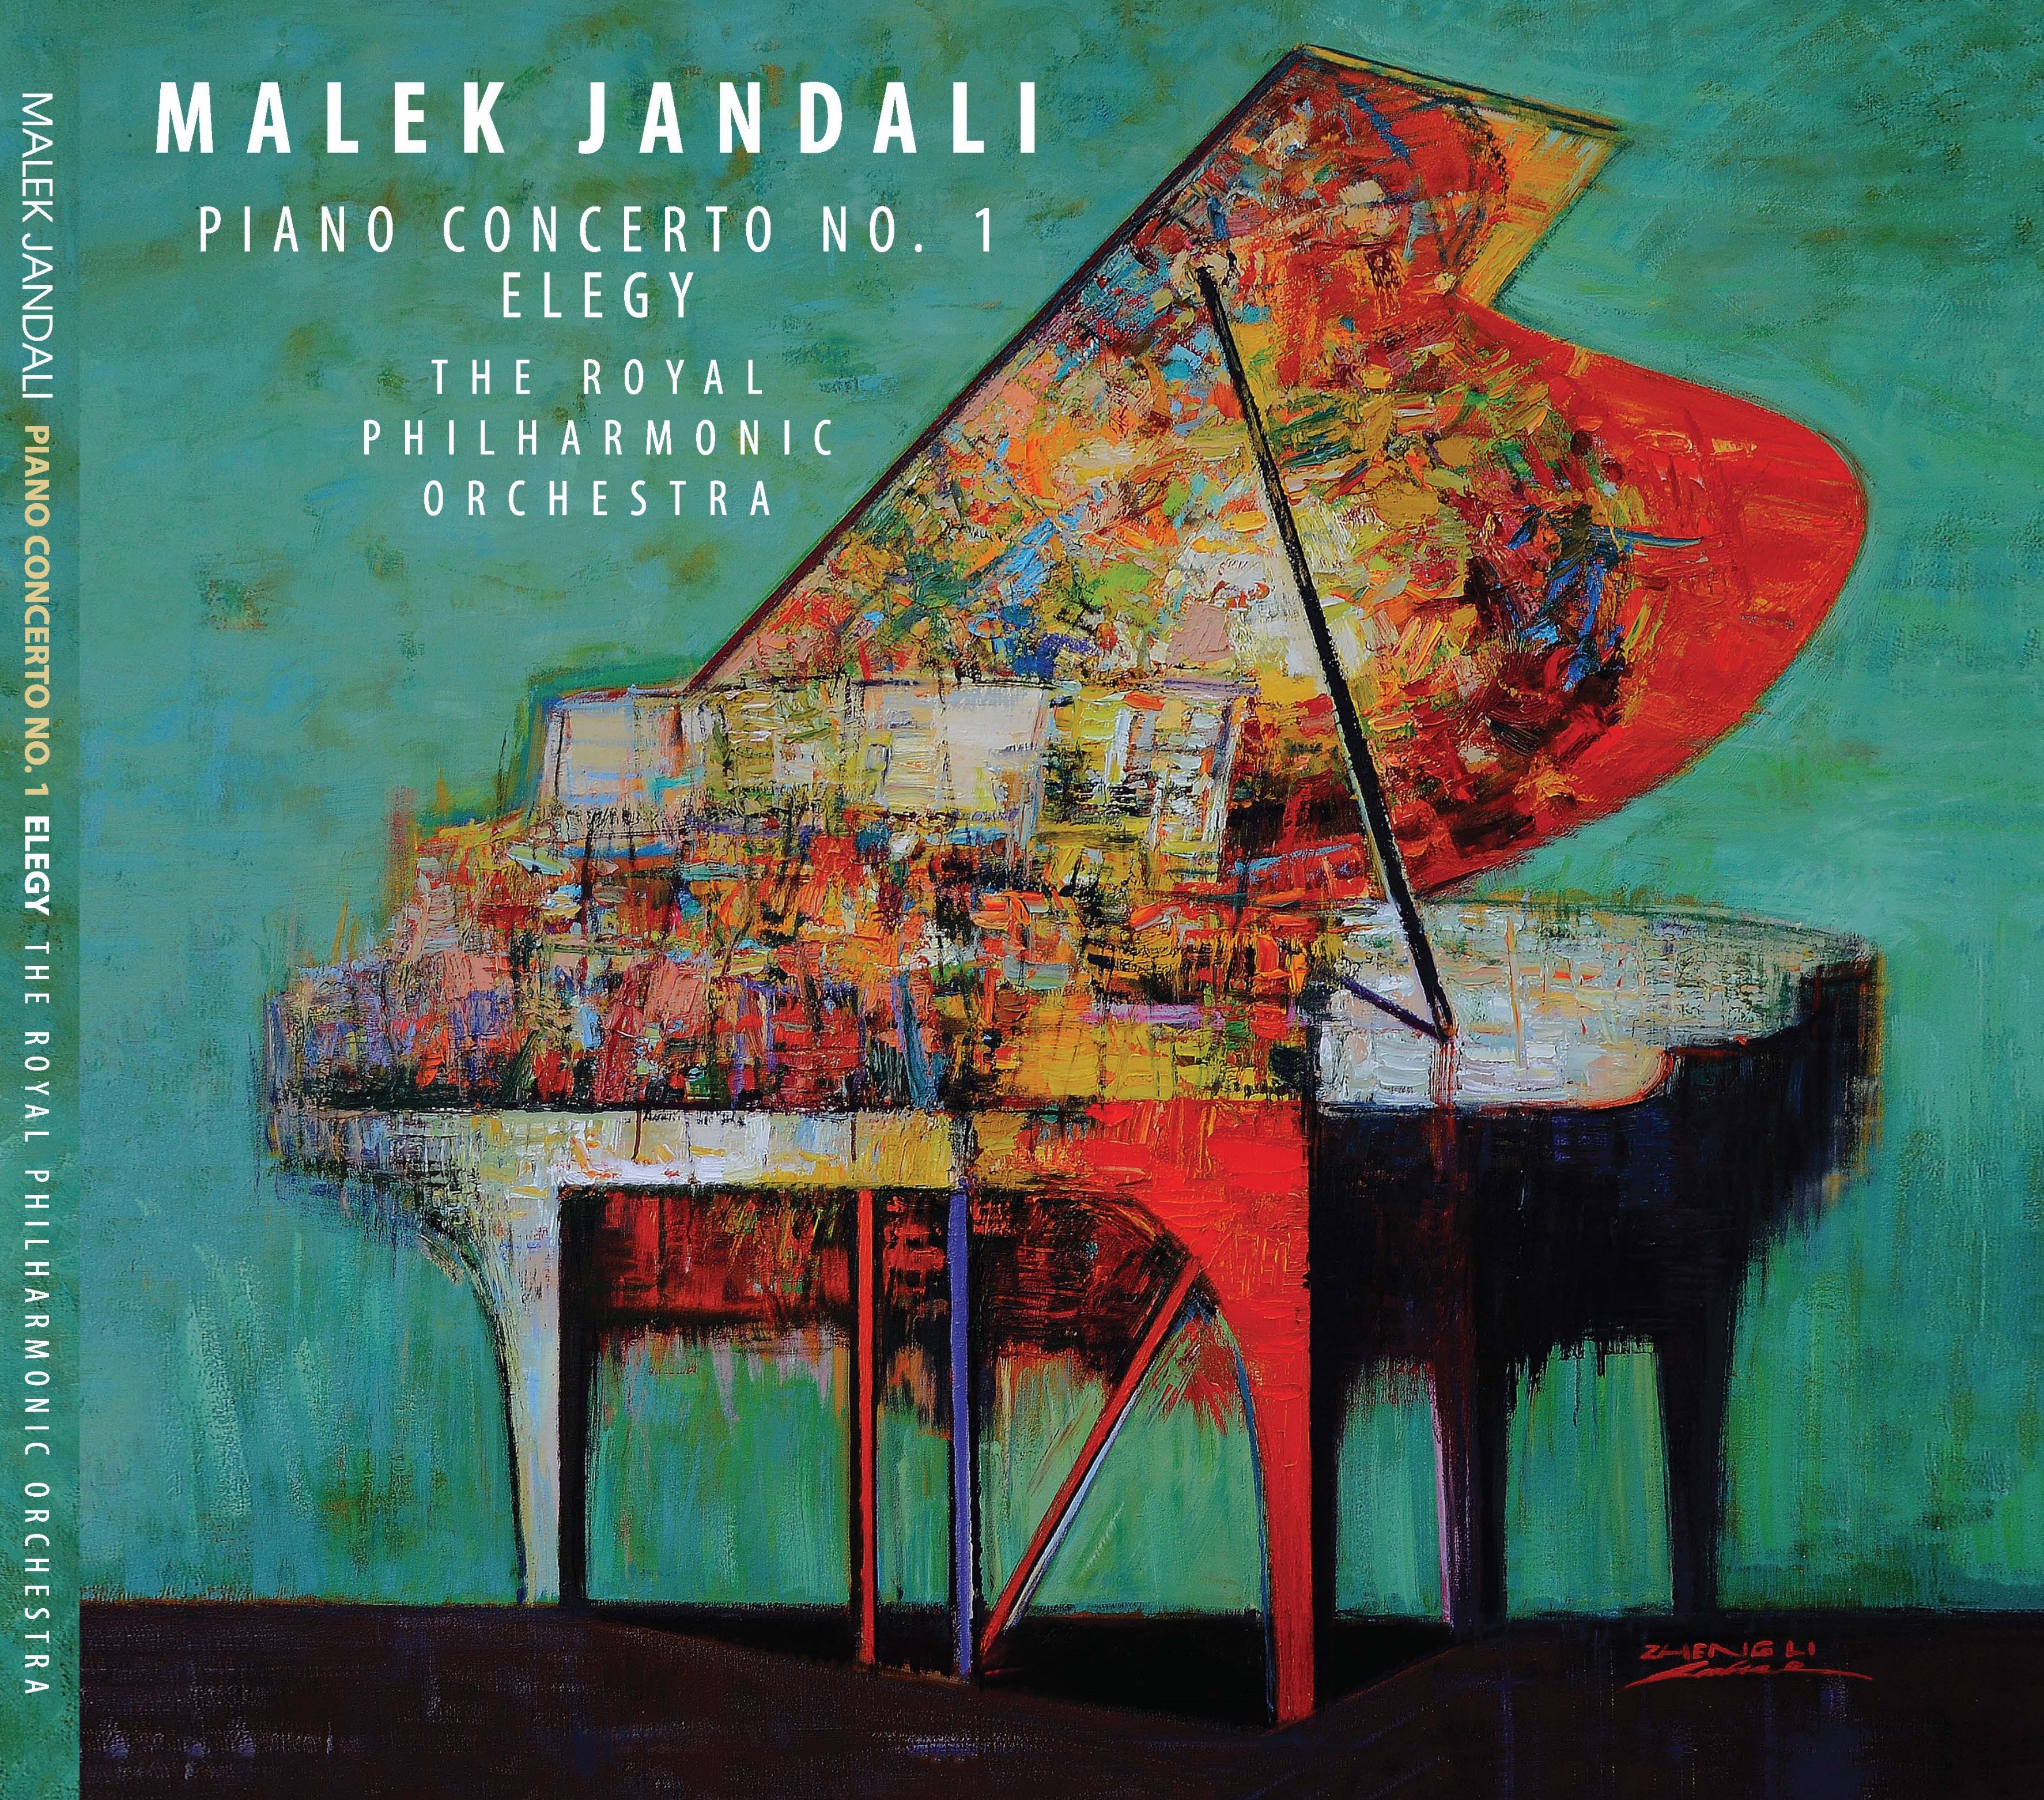 Cover of Malek Jandali's album "Piano Concerto No. 1 Elegy" (published by Soul b Music)